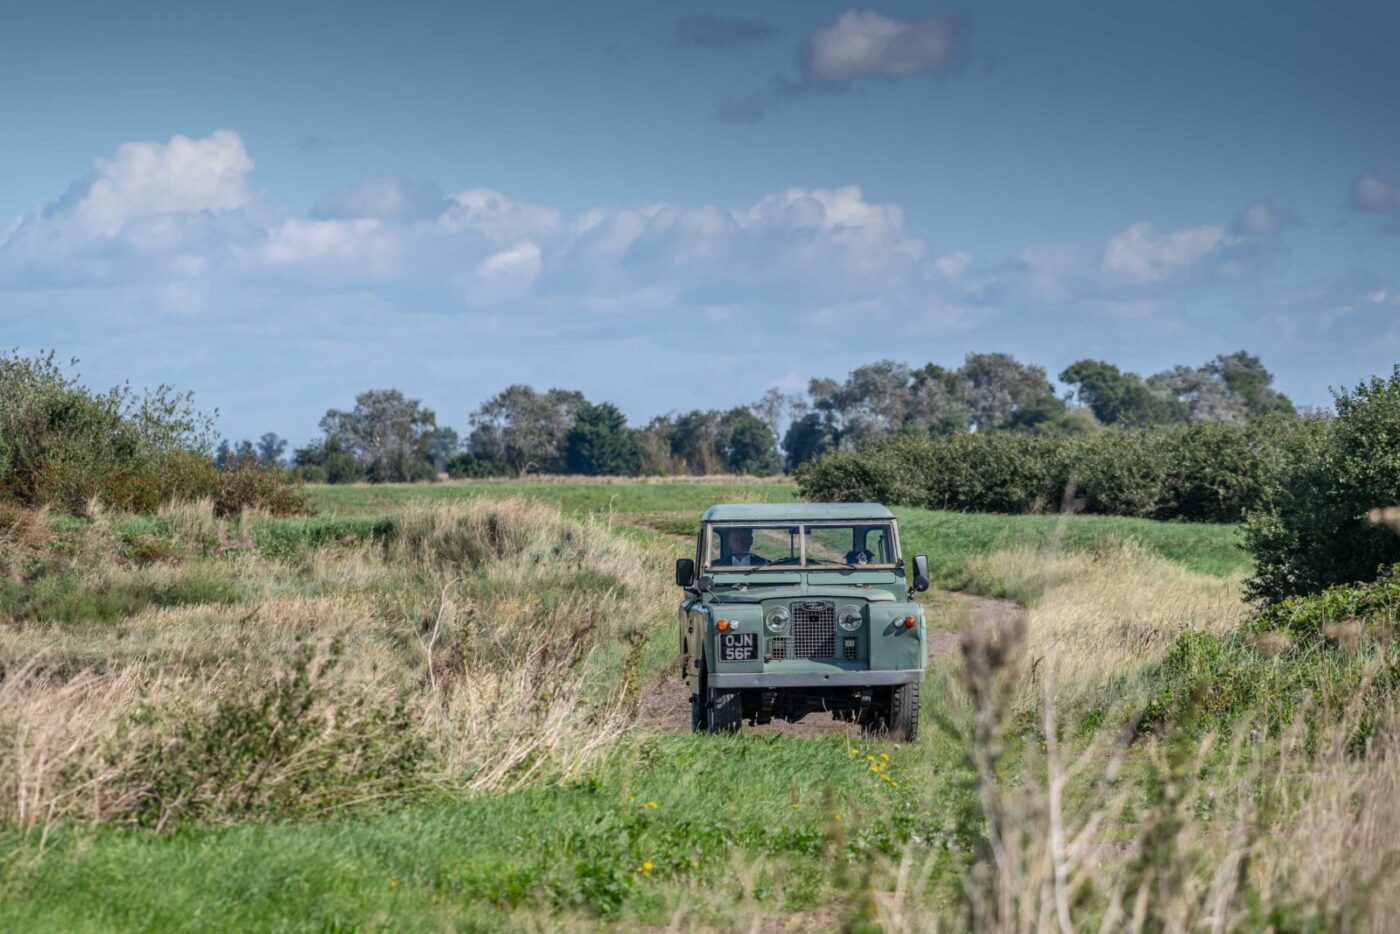 Land Rover SIIA in field